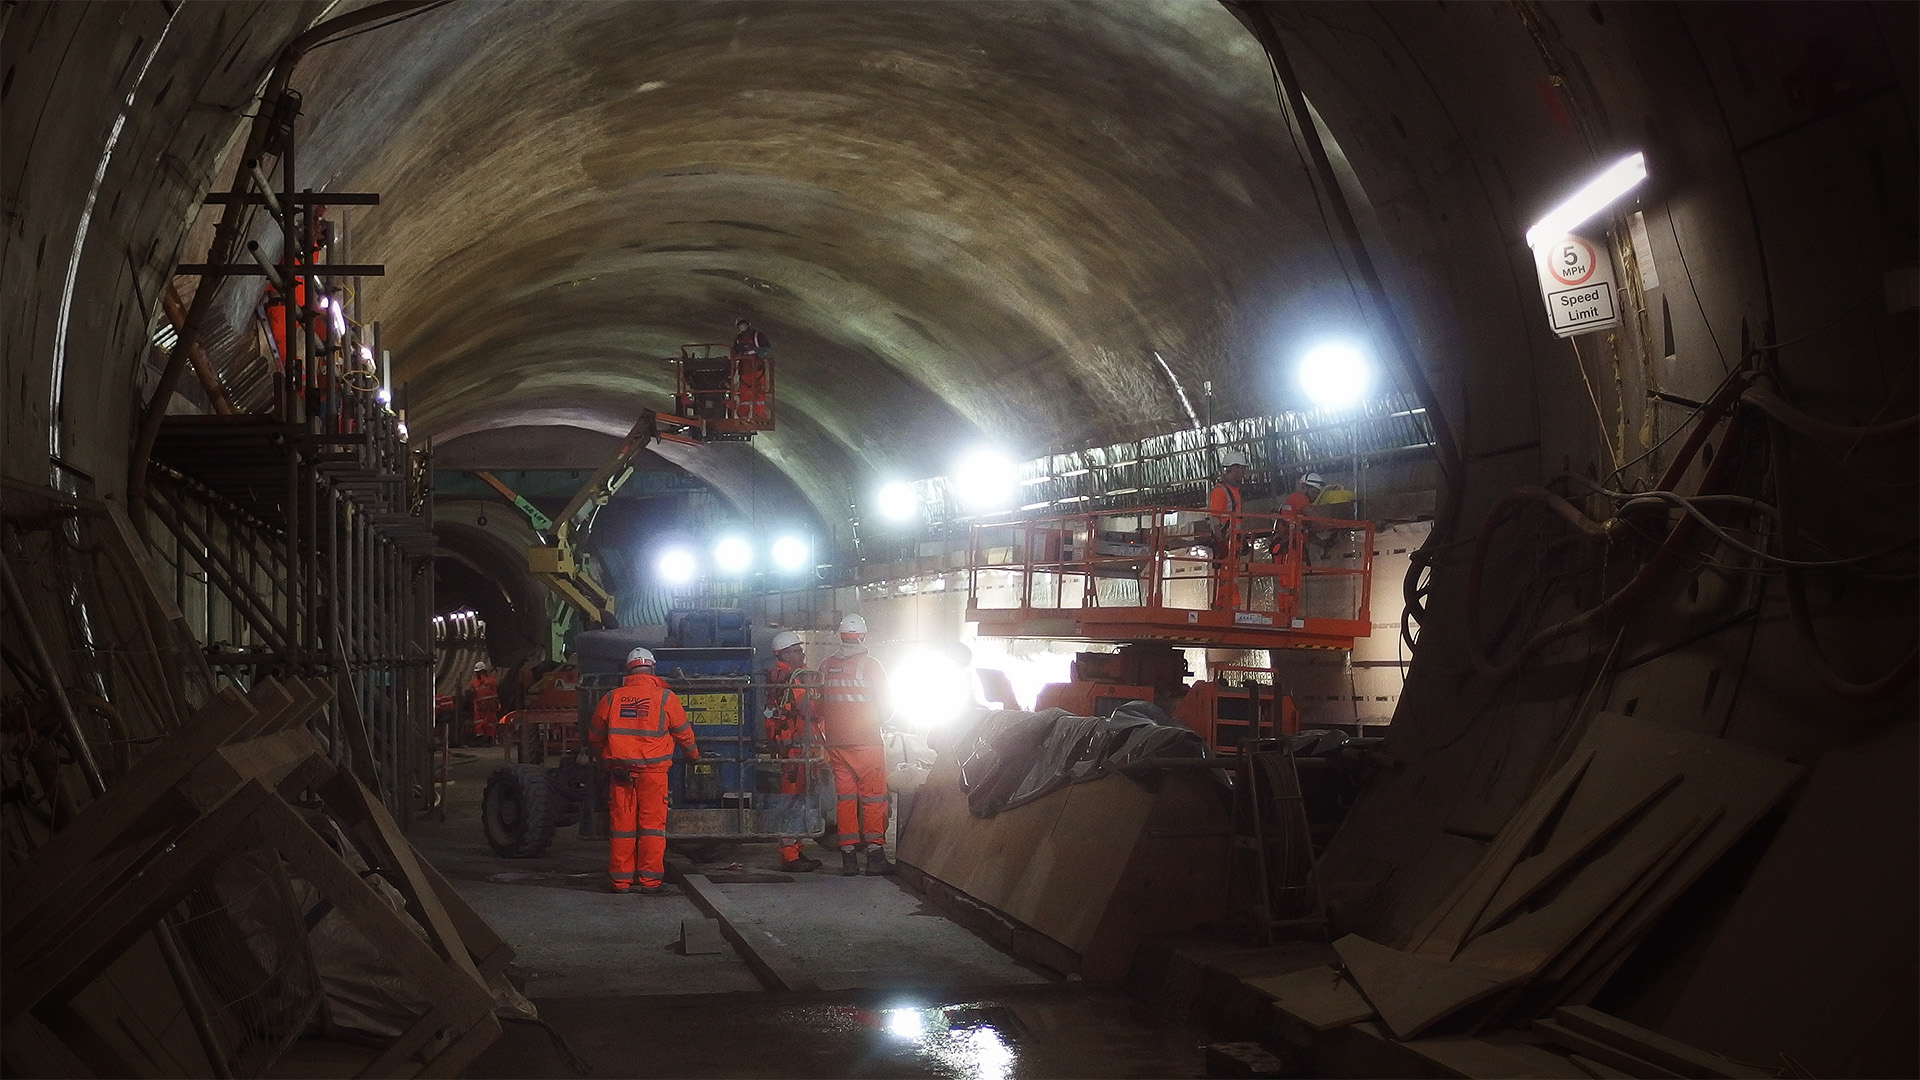 People in orange are working in a large tunnel on an elevated platform